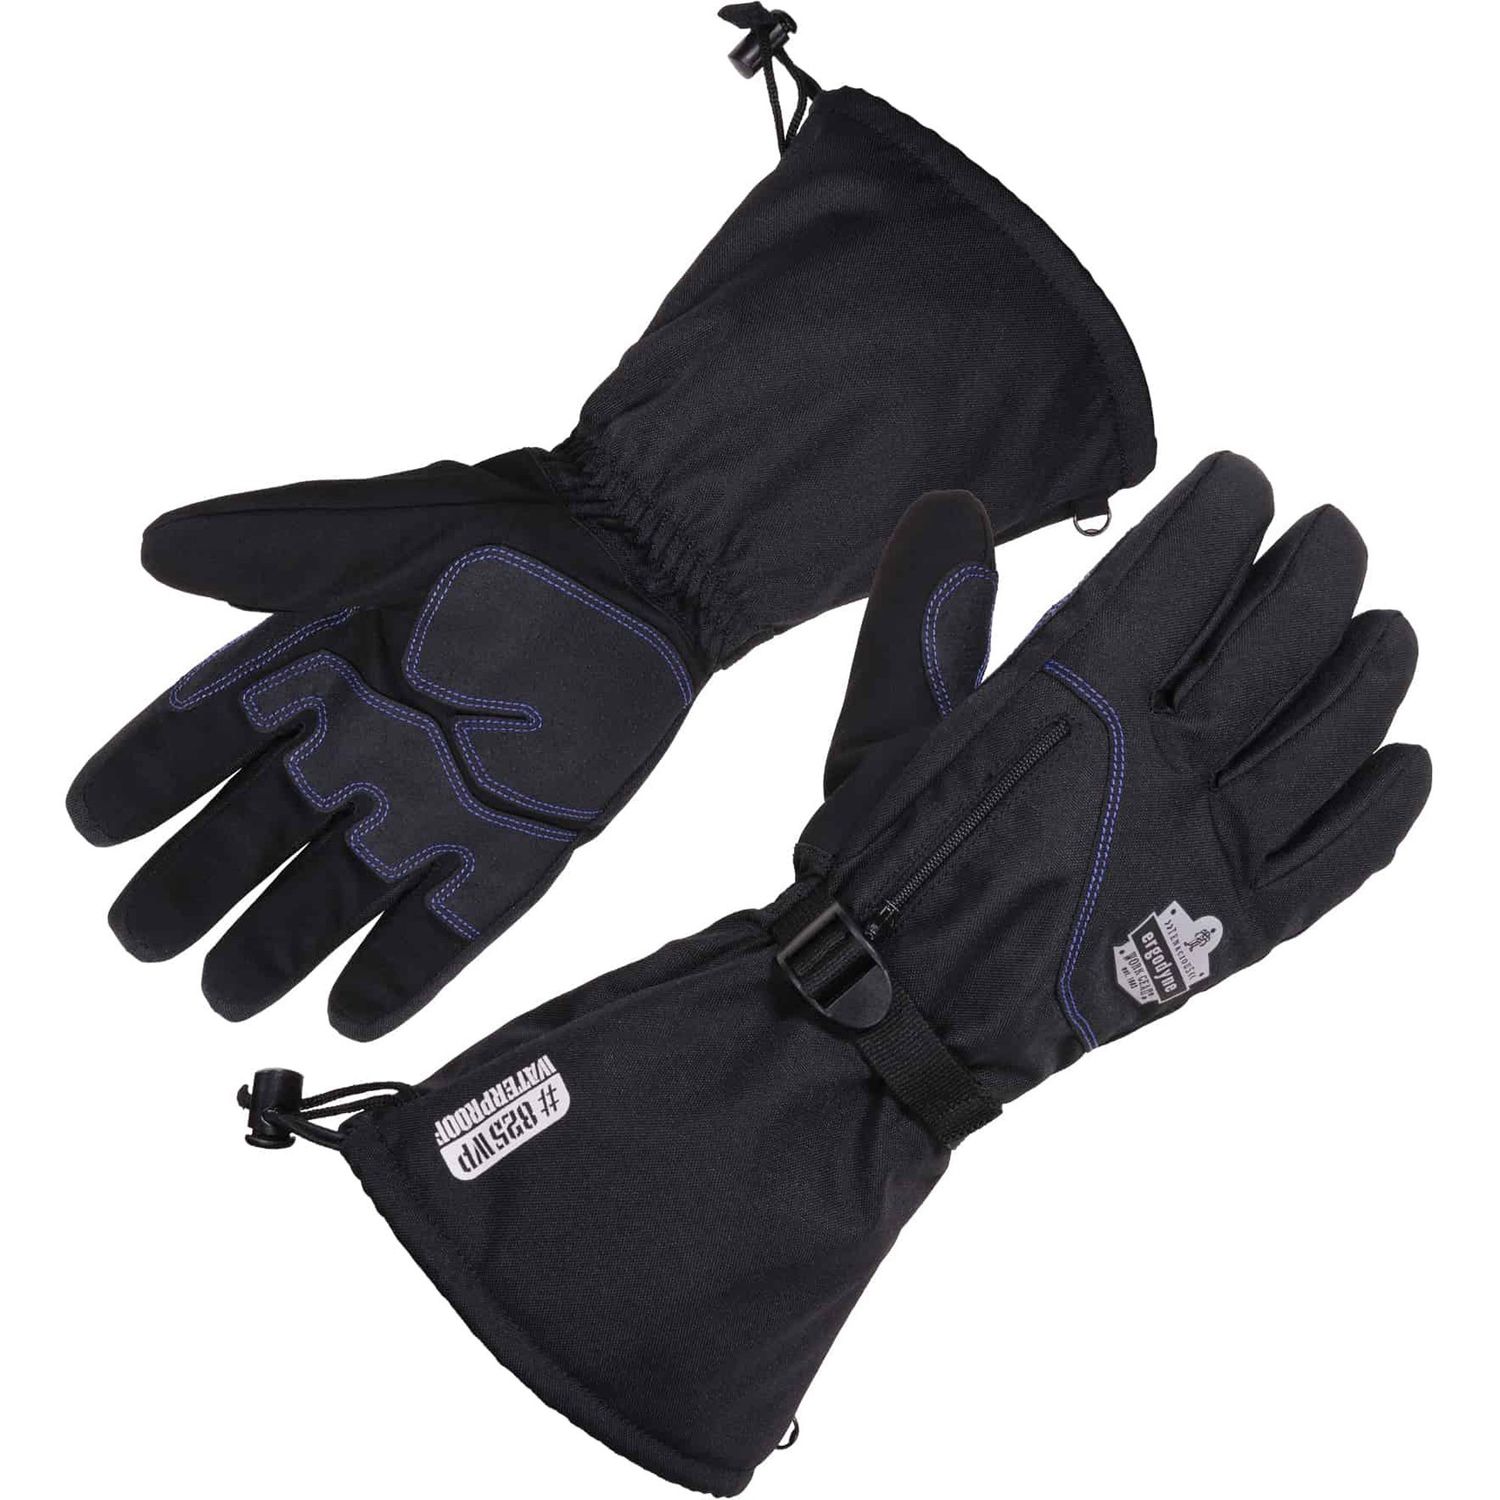 825WP Thermal Waterproof Winter Work Gloves Thermal Protection, Small Size, Neoprene Knuckle Pad, Black